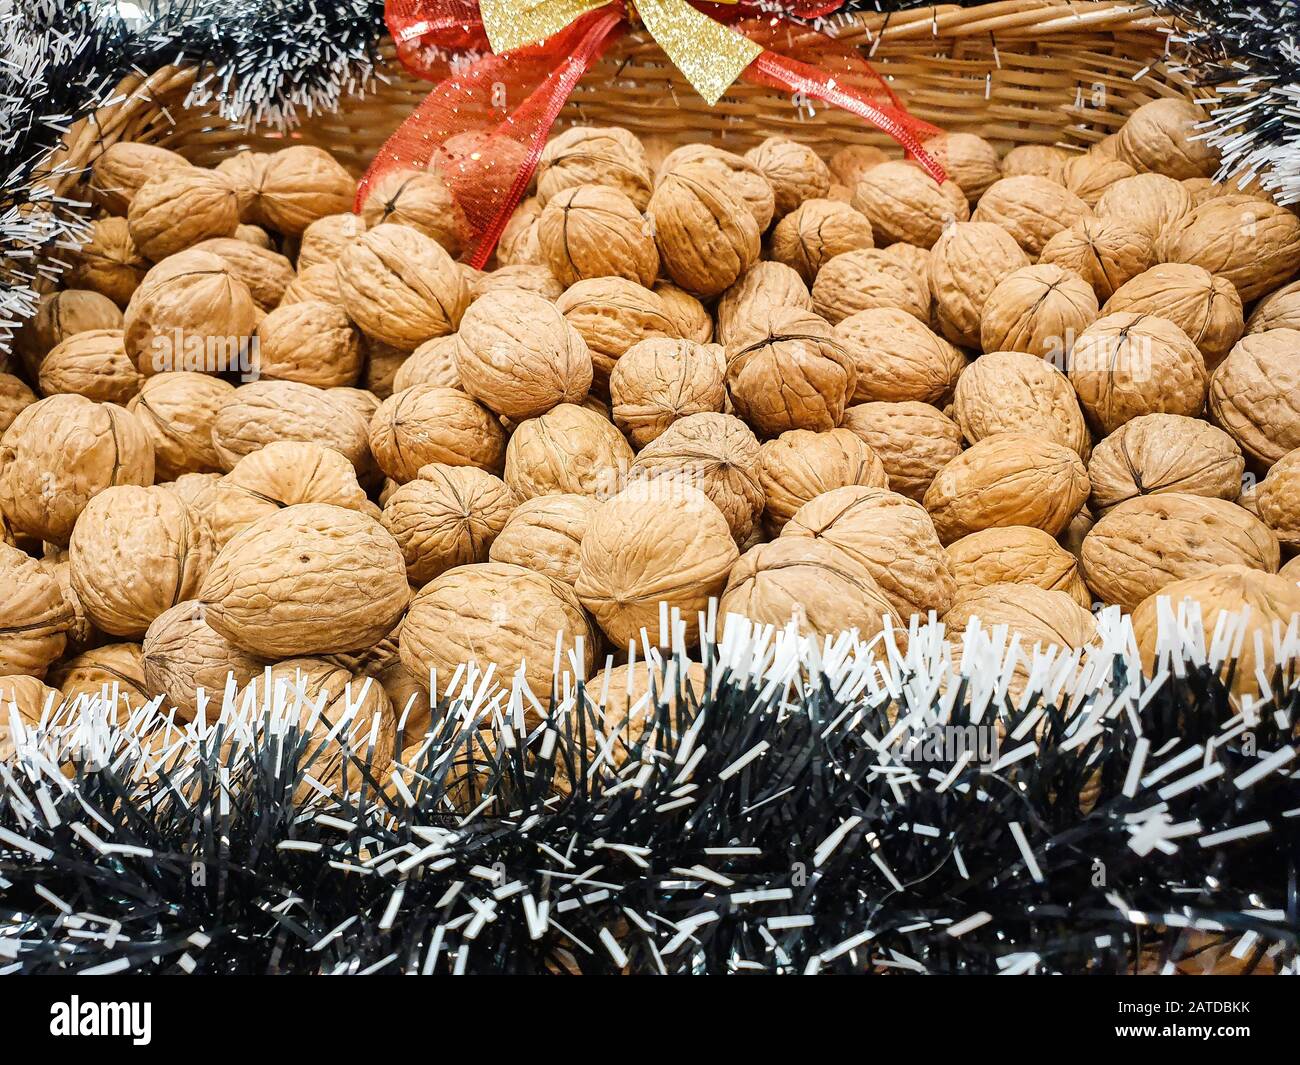 Walnuts in a Christmas basket Stock Photo